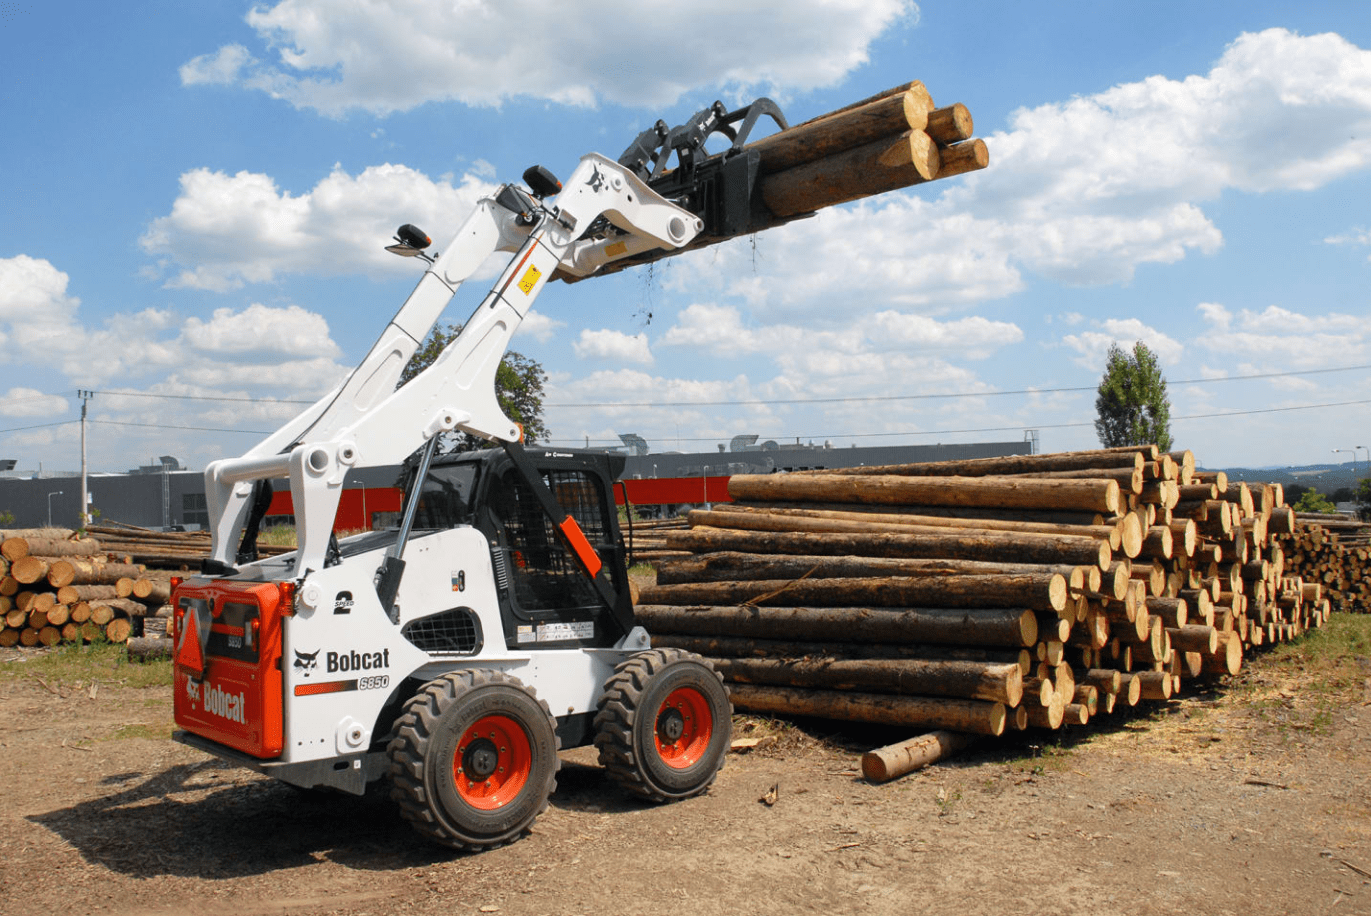 Browse Specs and more for the Bobcat S850 Skid-Steer Loader - Bobcat of North Texas